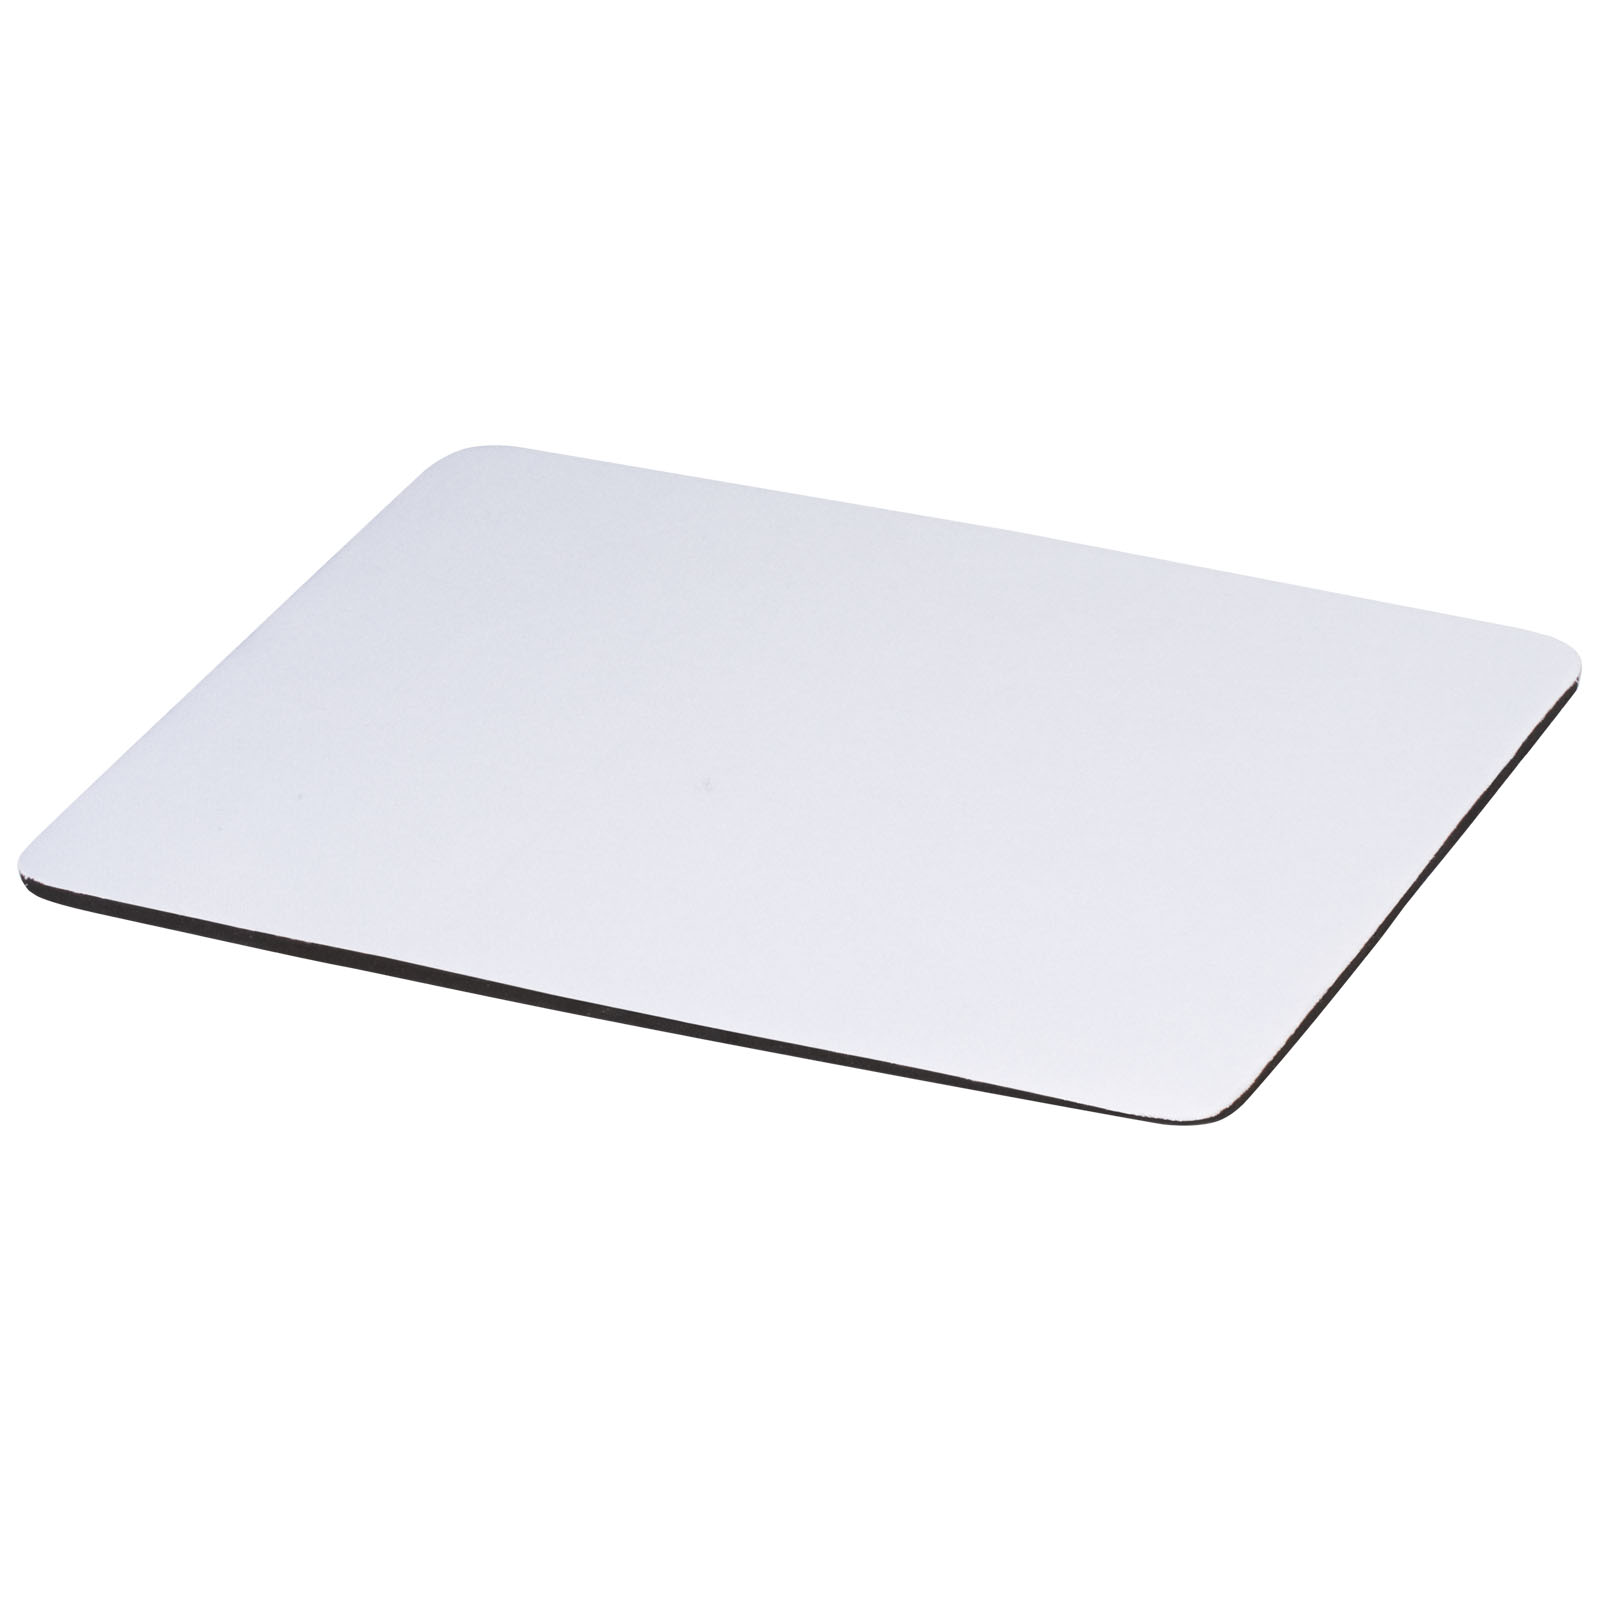 Computer Accessories - Pure mouse pad with antibacterial additive